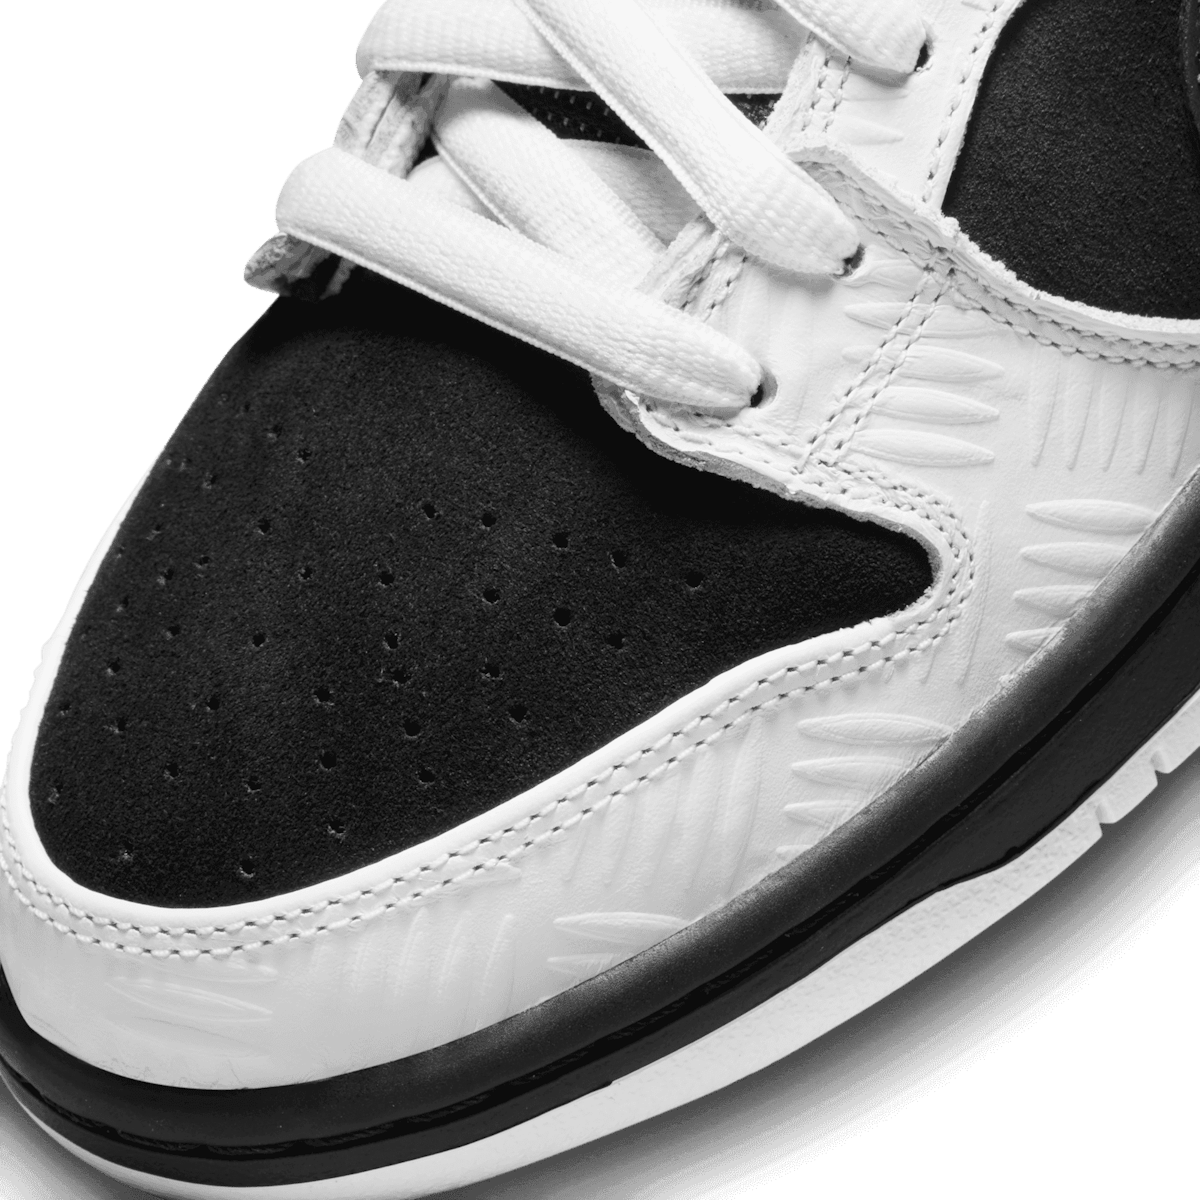 Nike SB Dunk Low Tightbooth - FD2629-100 Raffles and Release Date